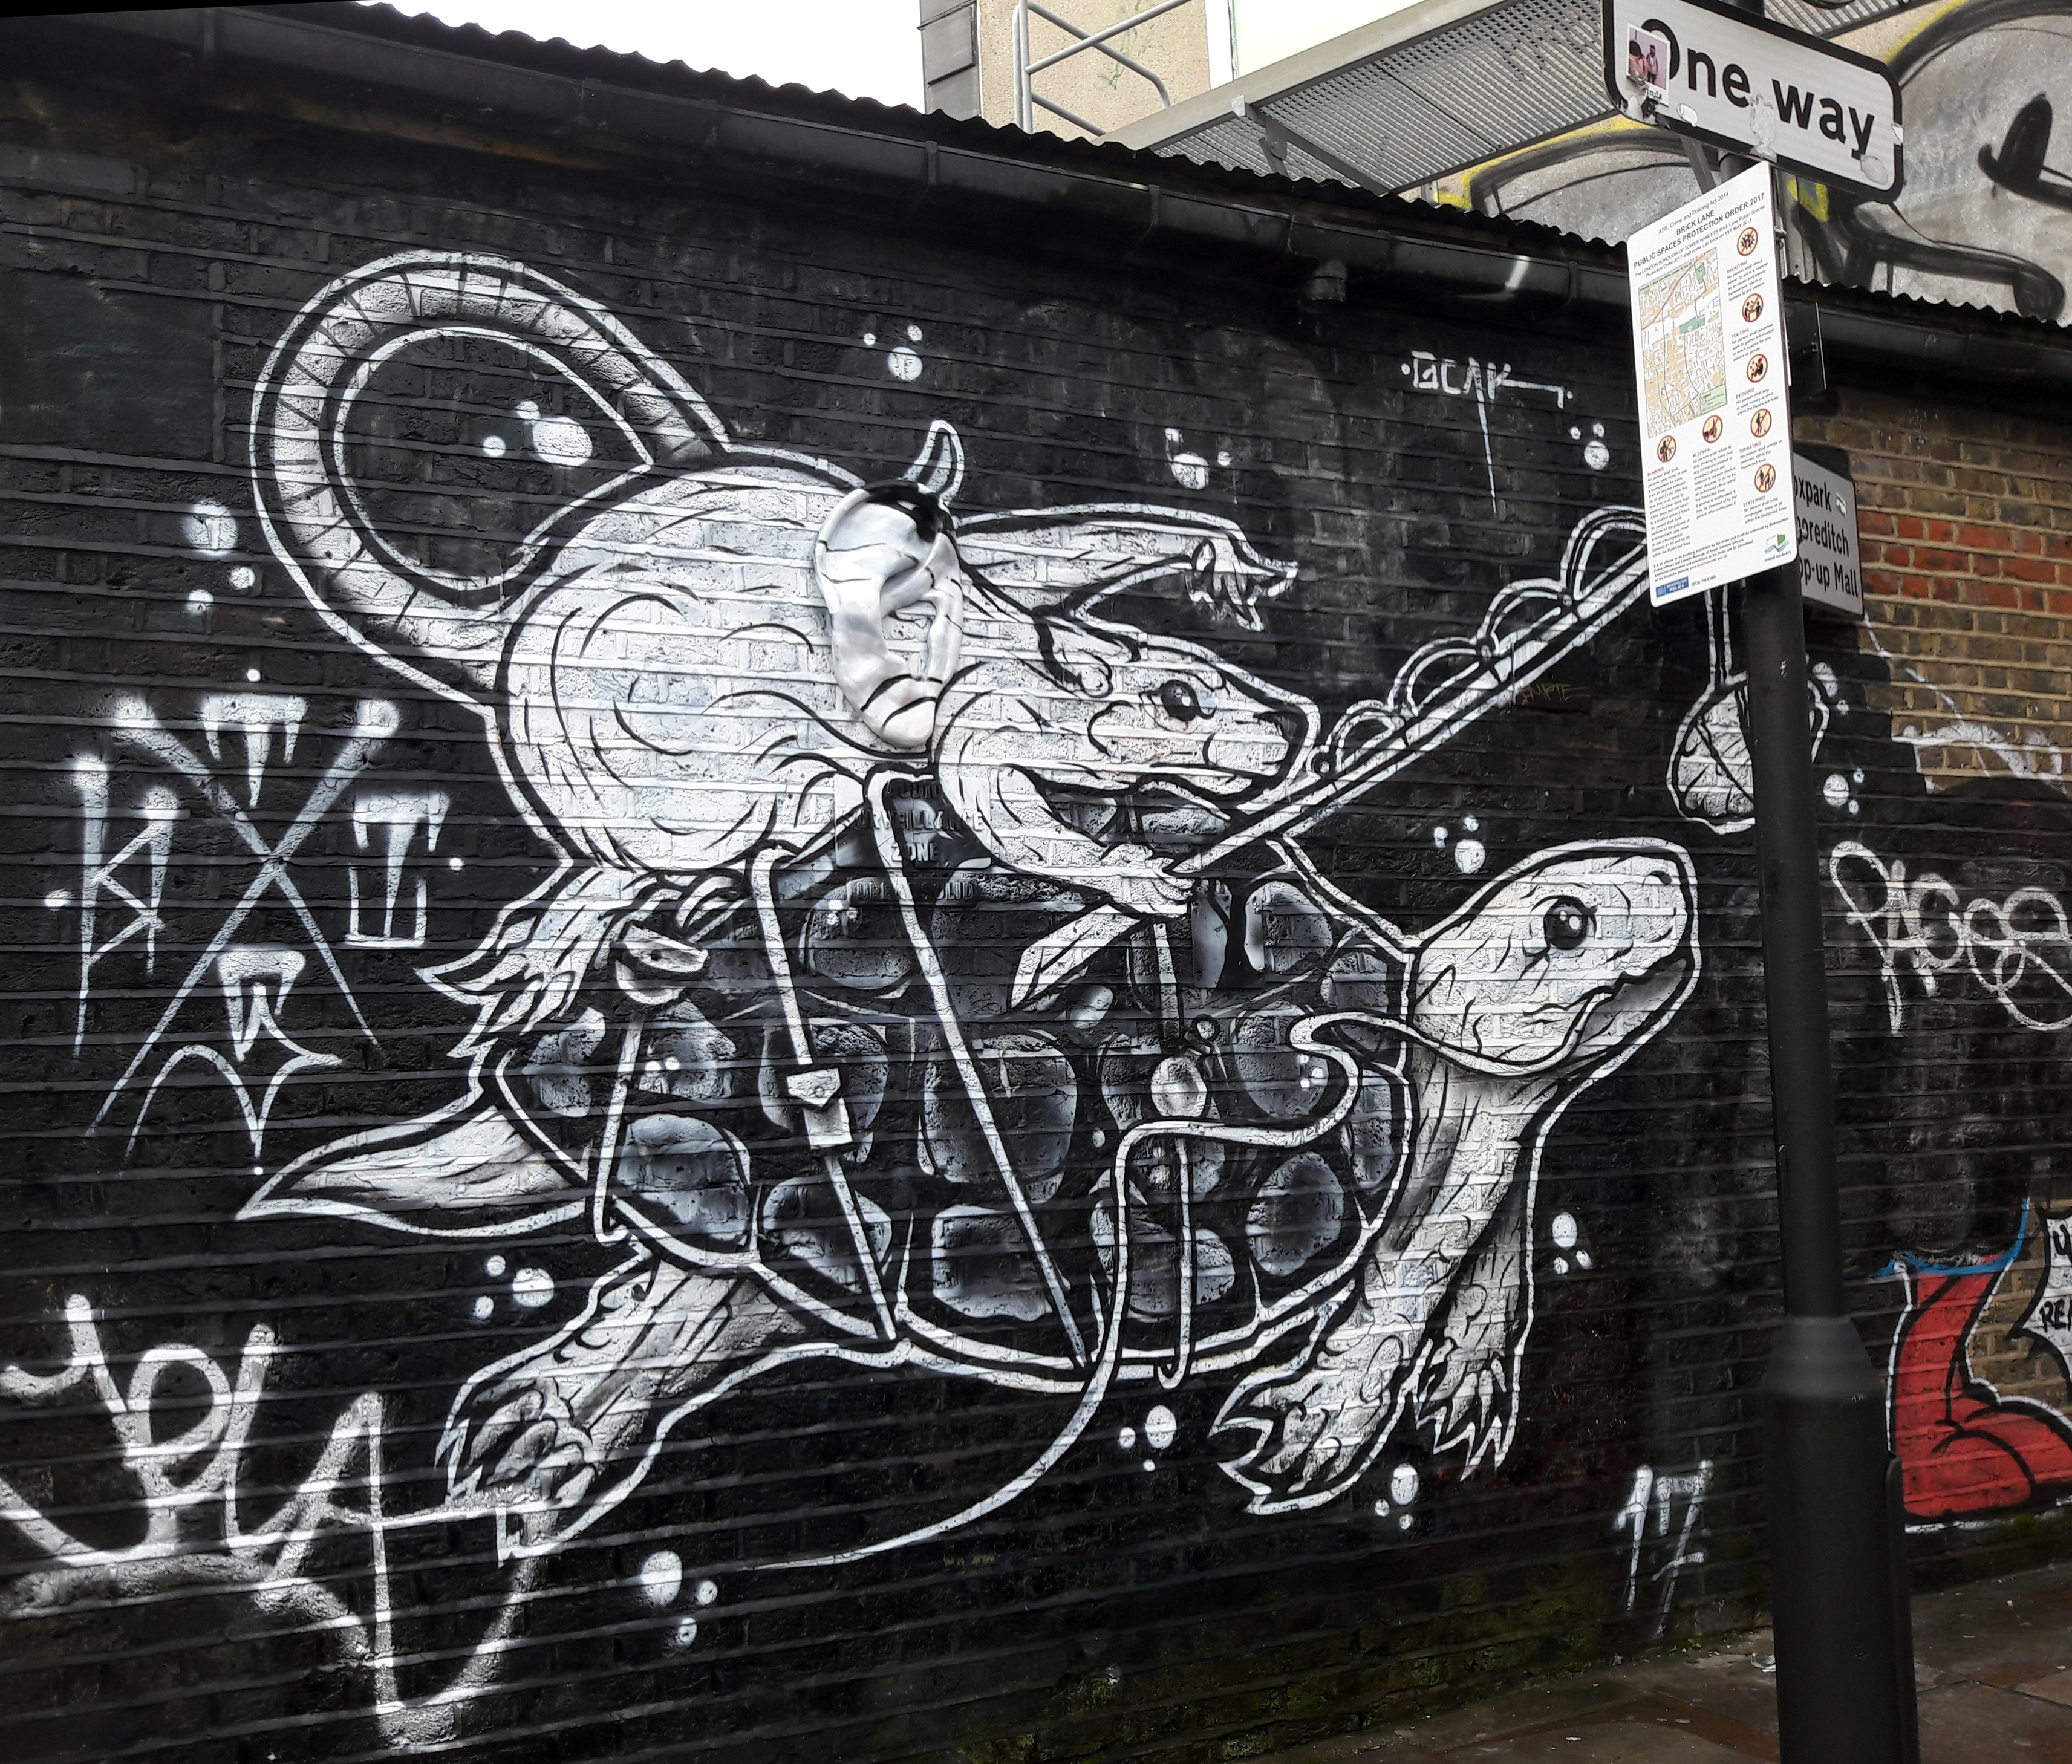 Graffiti 6553  by the artist ThisOne captured by Mephisroth in London United Kingdom